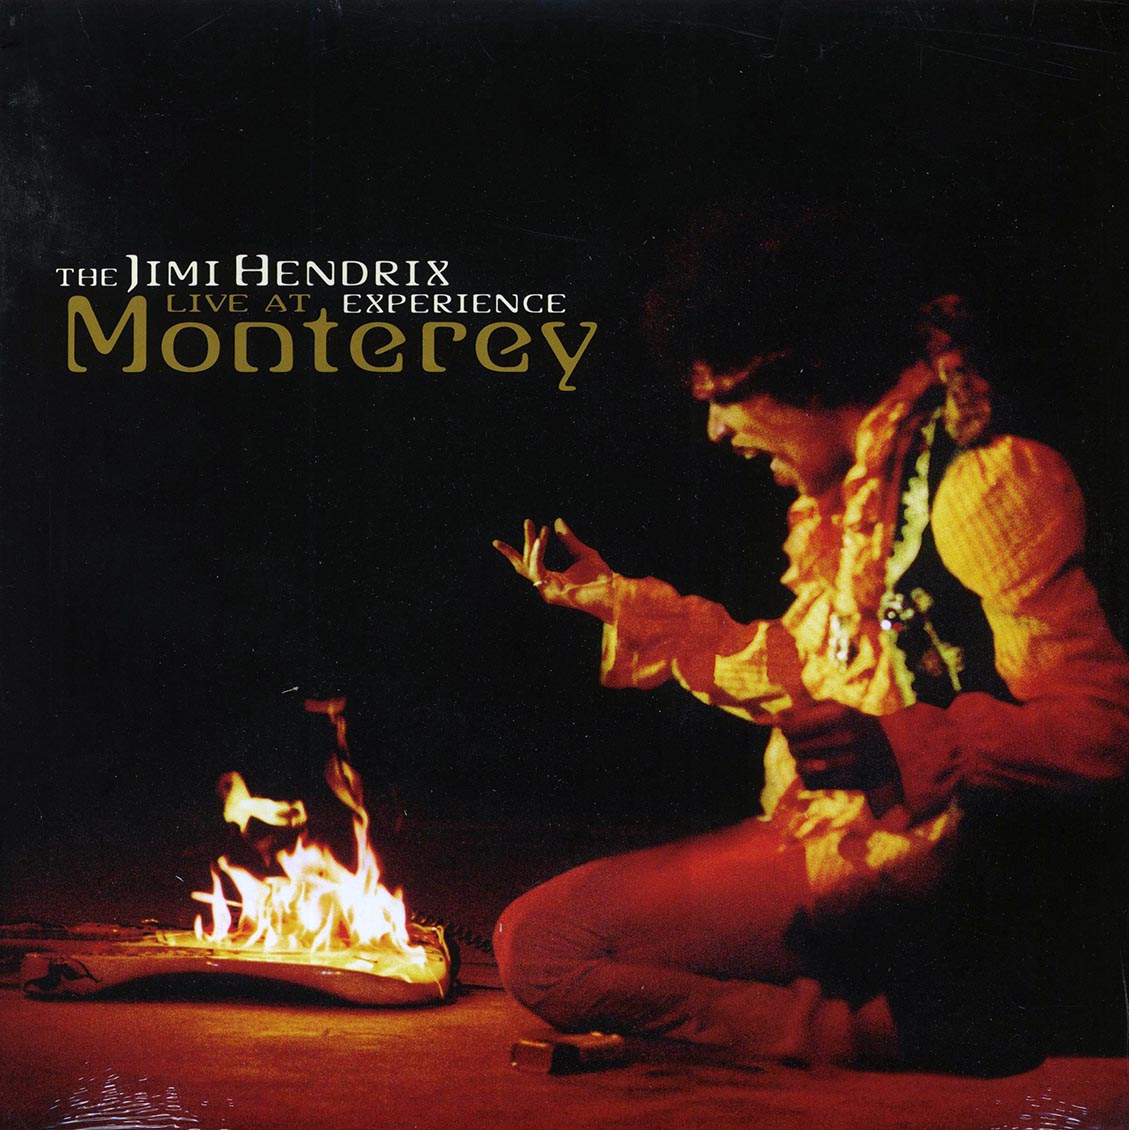 The Jimi Hendrix Experience - Live At Monterey (180g) (remastered) - Vinyl LP